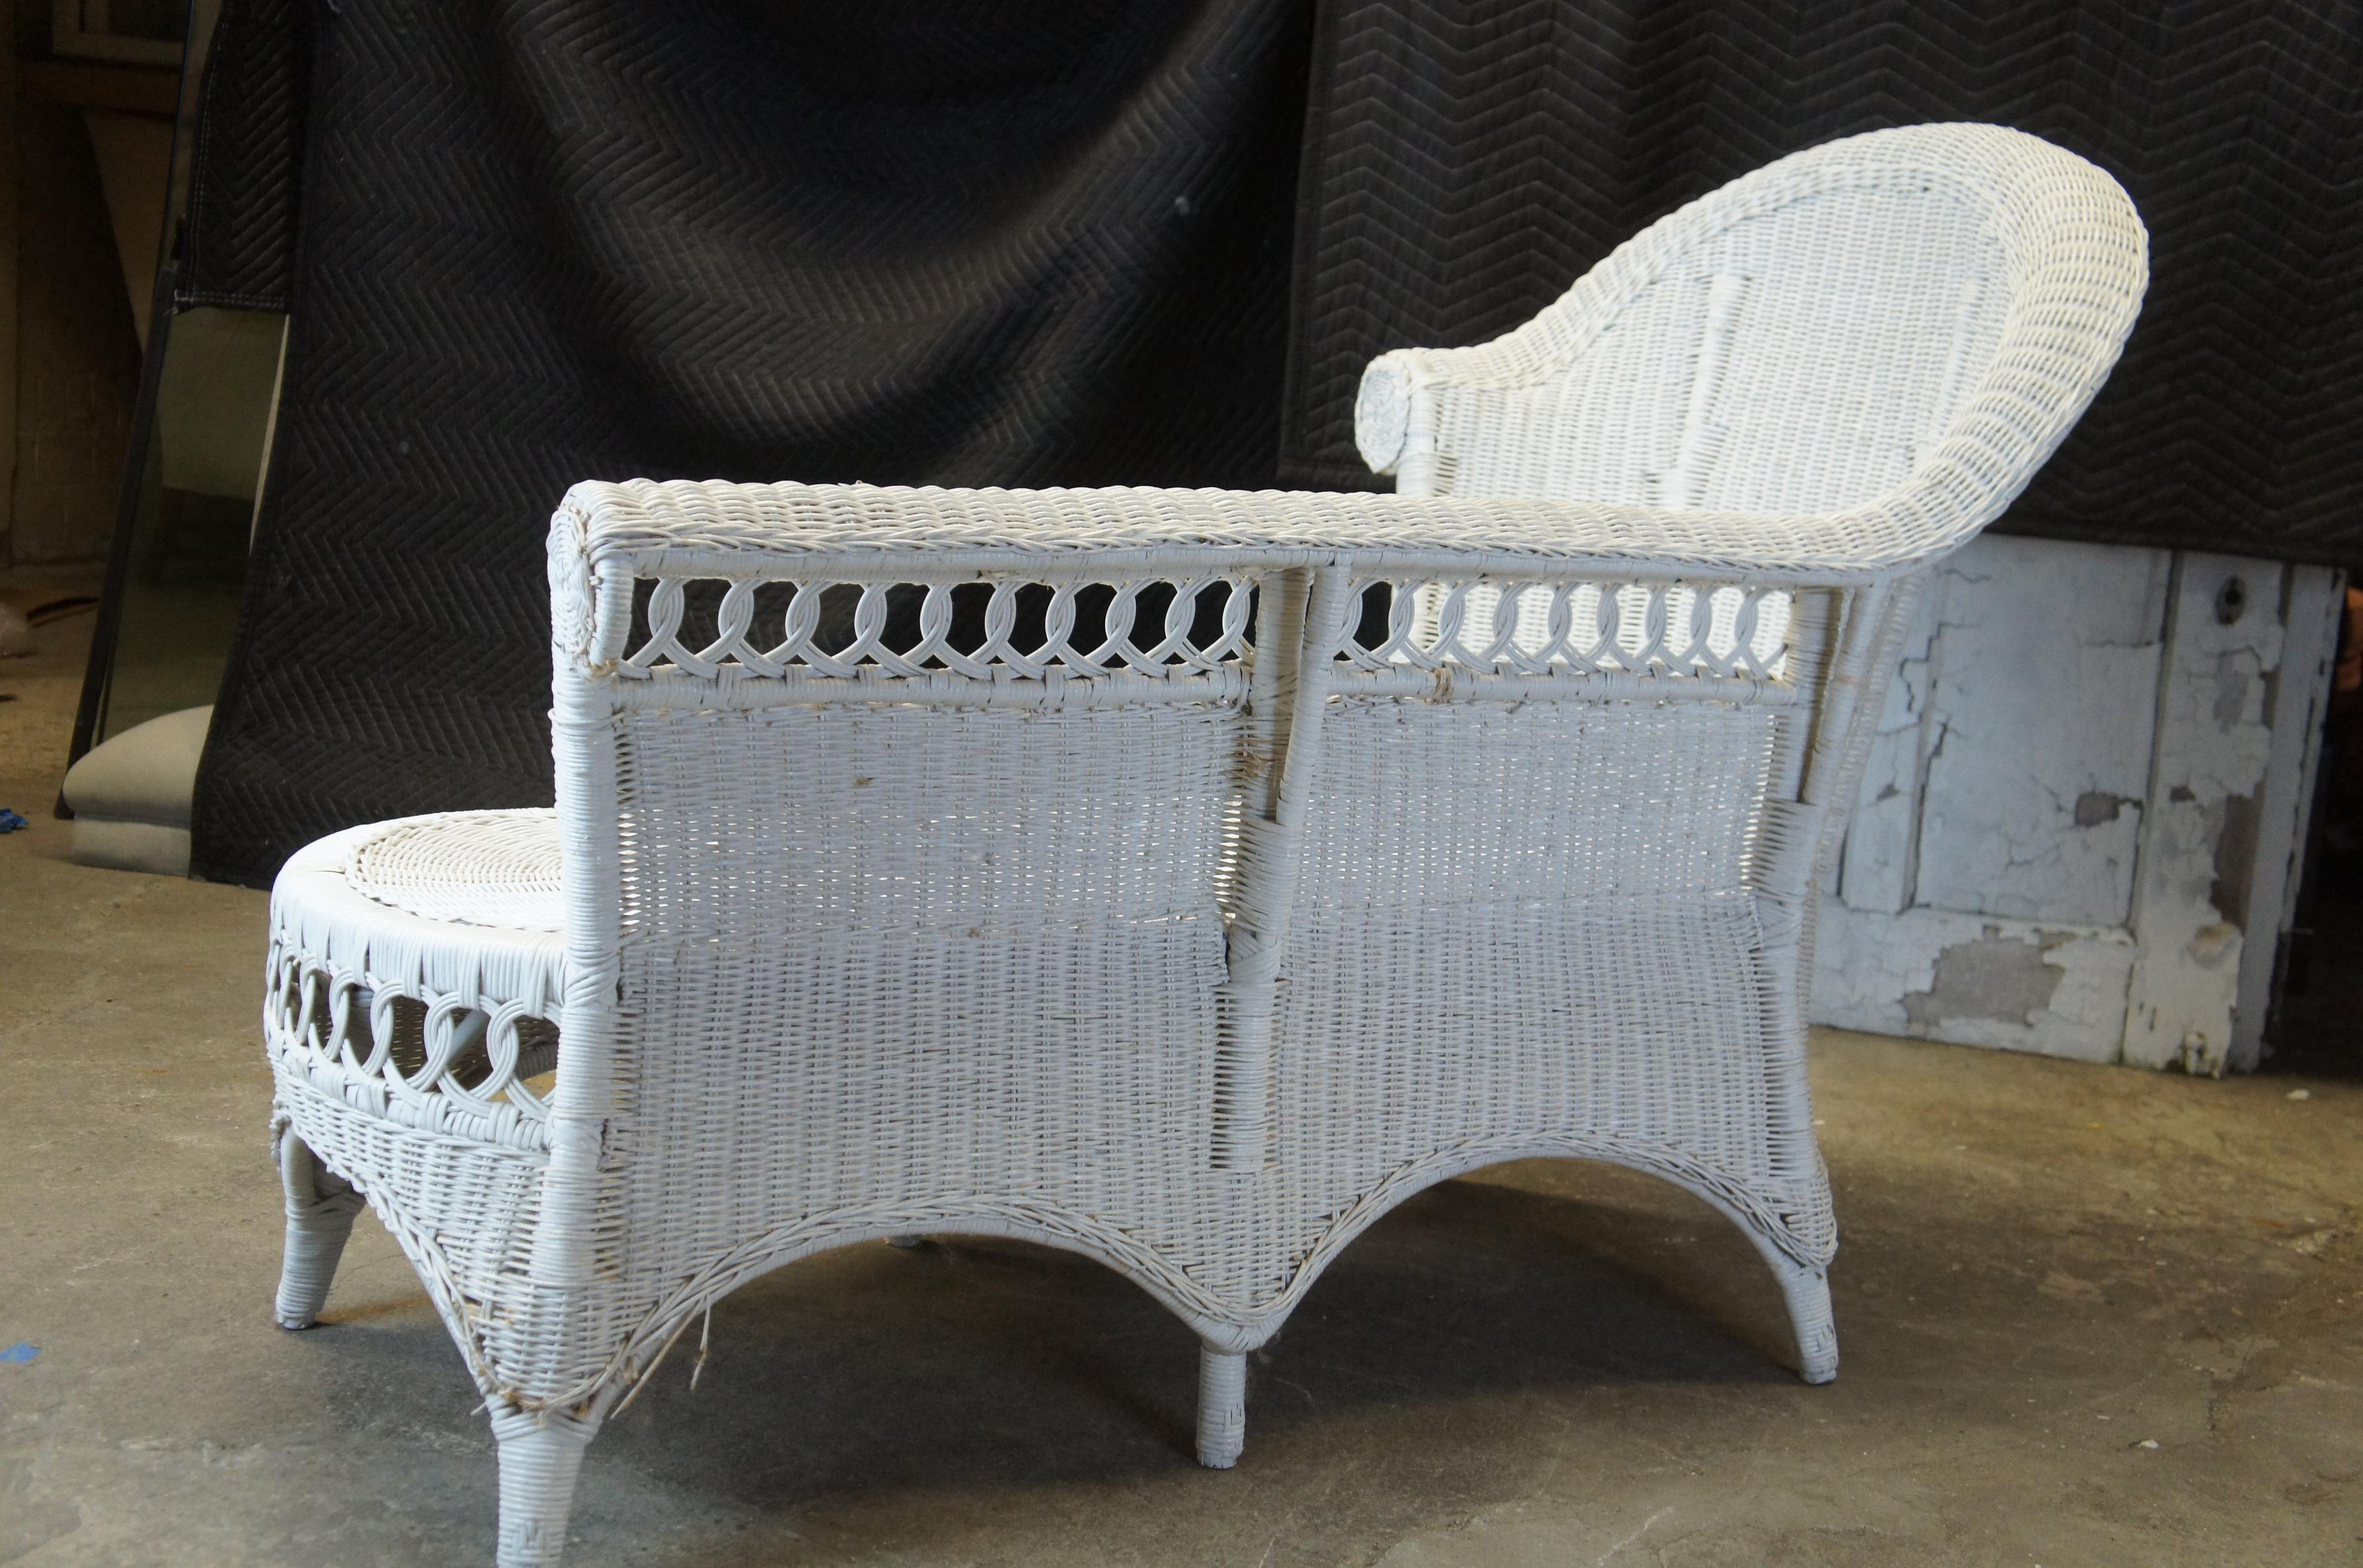 Vintage White American Wicker Rattan Chaise Lounge Chair Rolled Arm Boho Chic 1